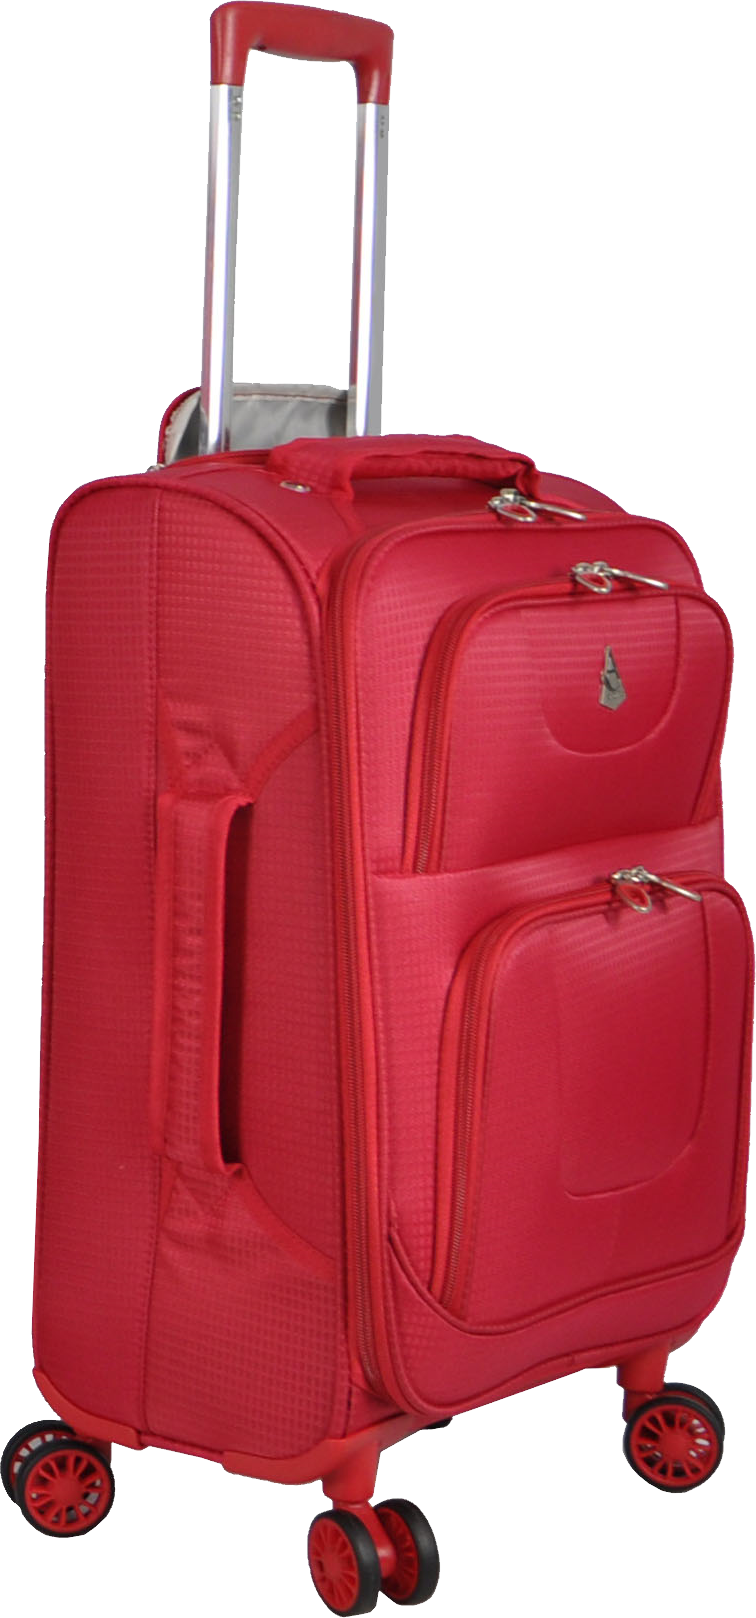 Red Wheeled Carry On Luggage